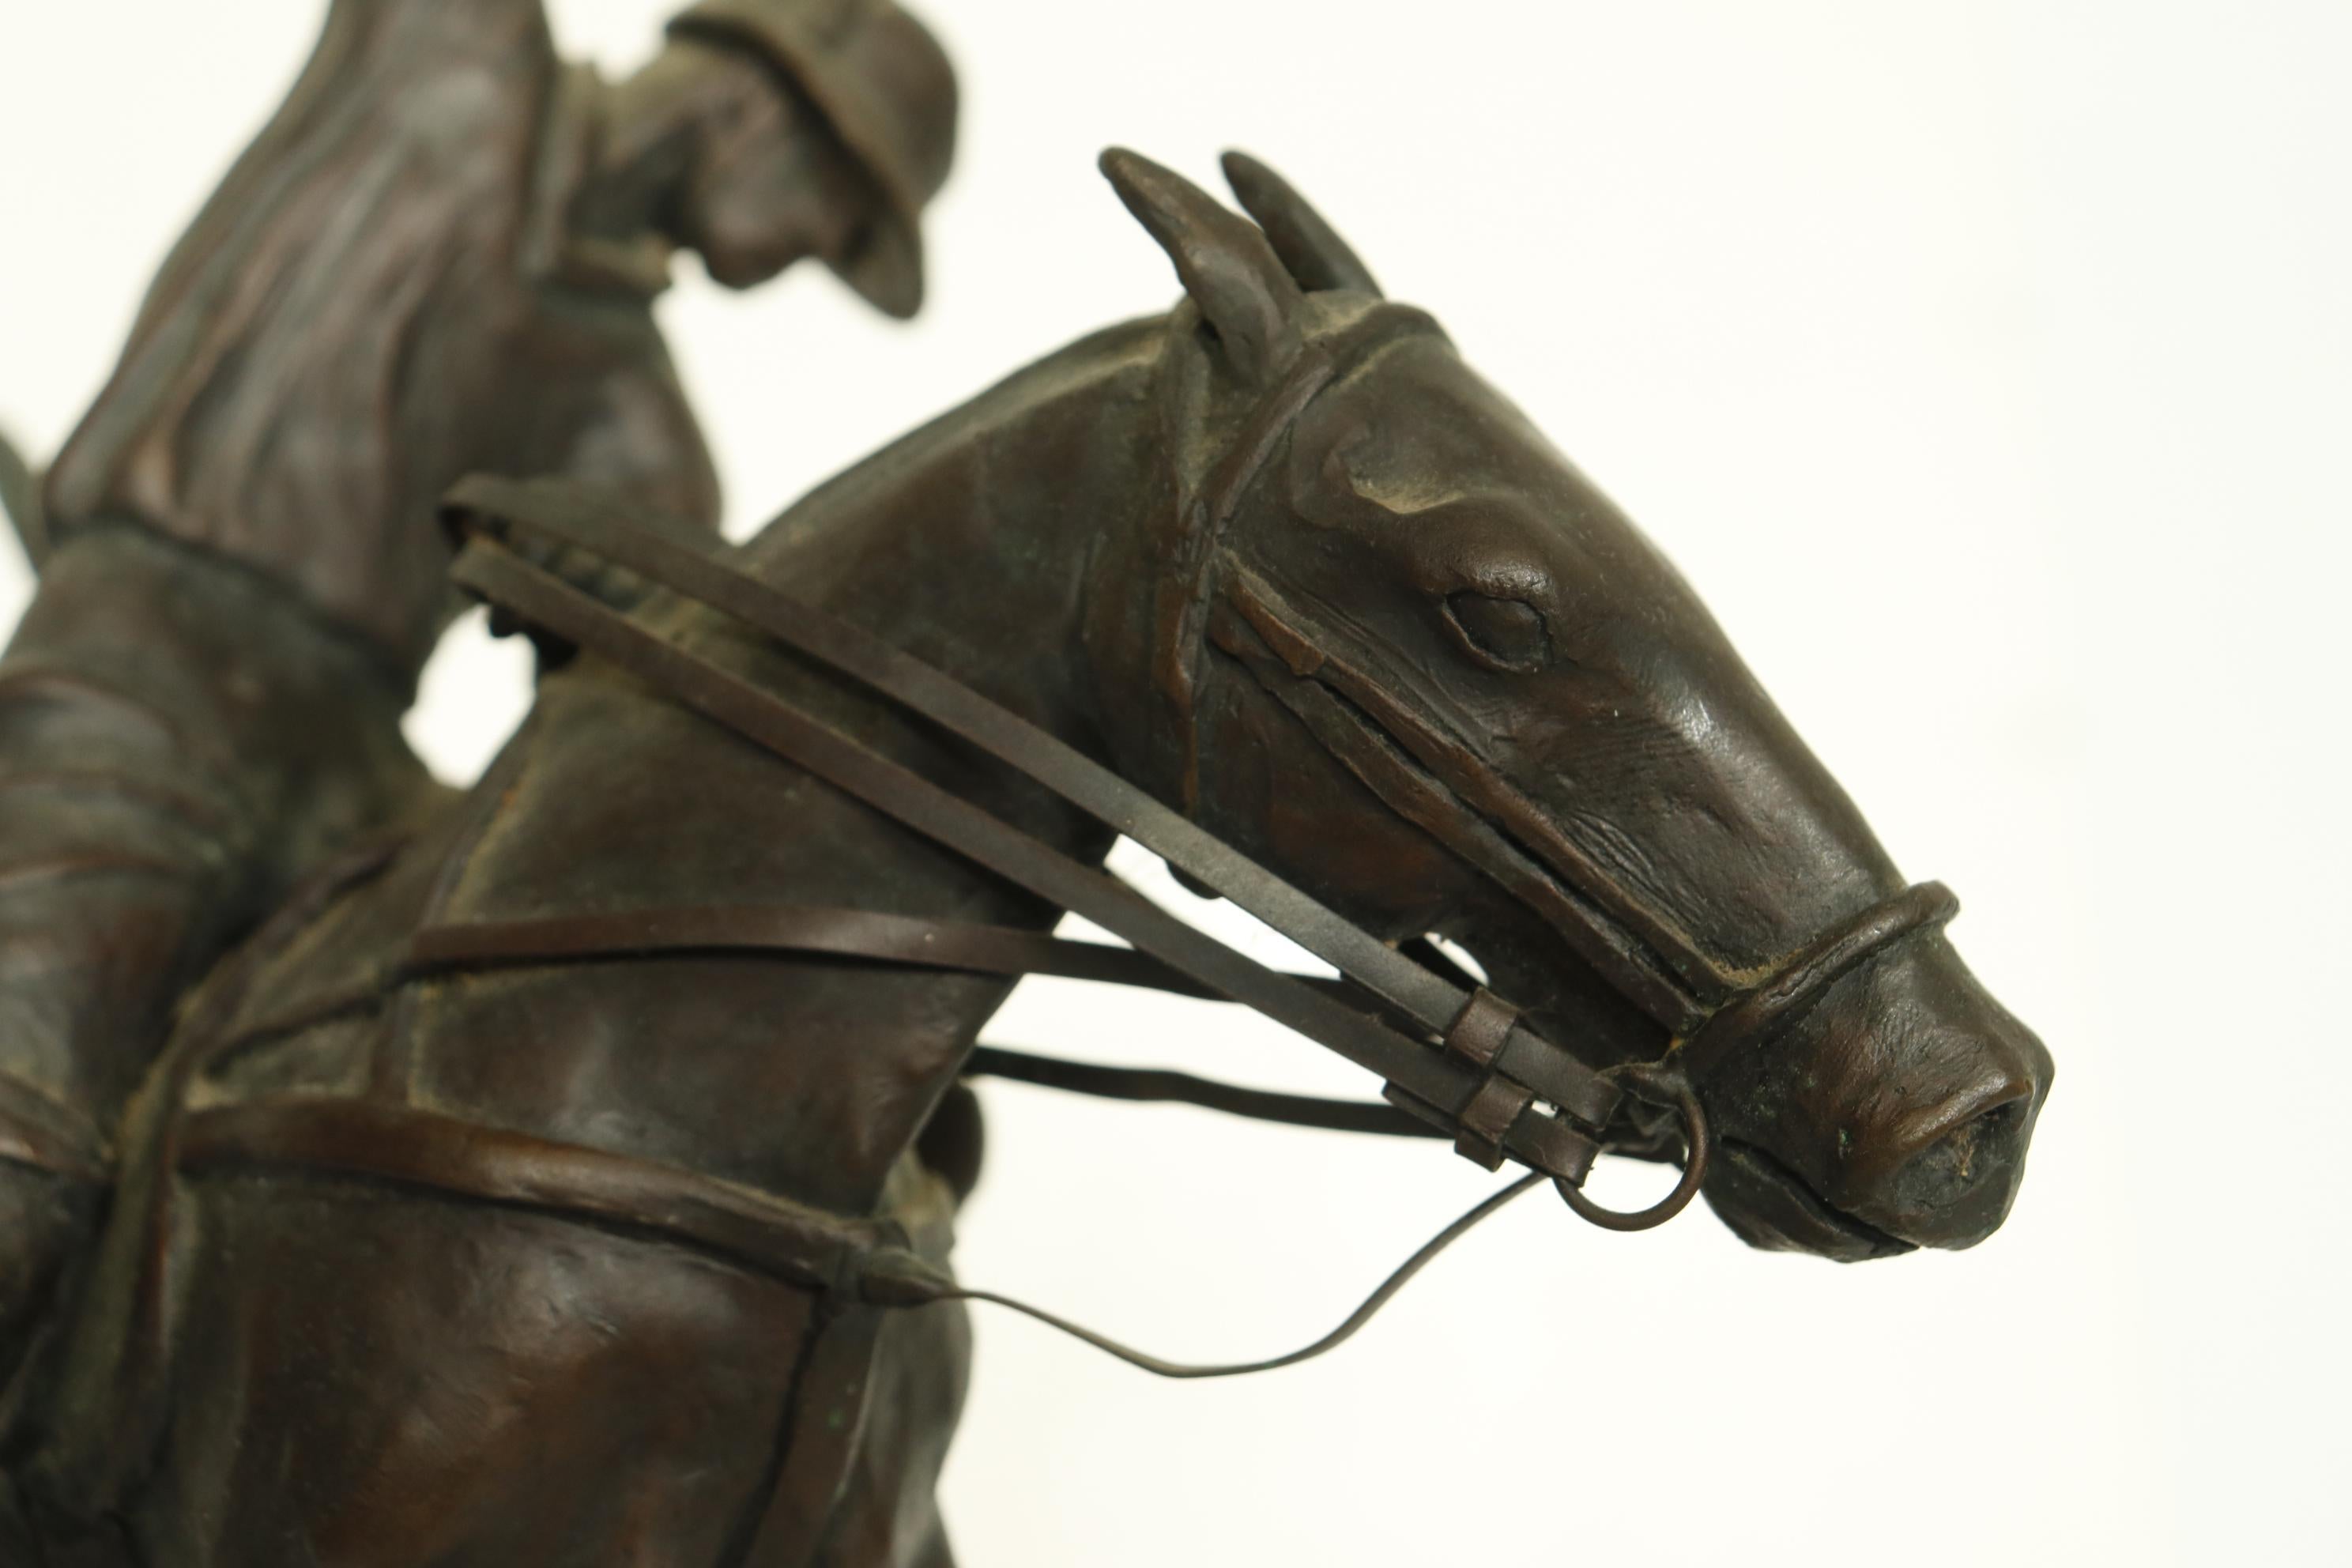 American Pacific Coast Polo Player Trophy, 2005